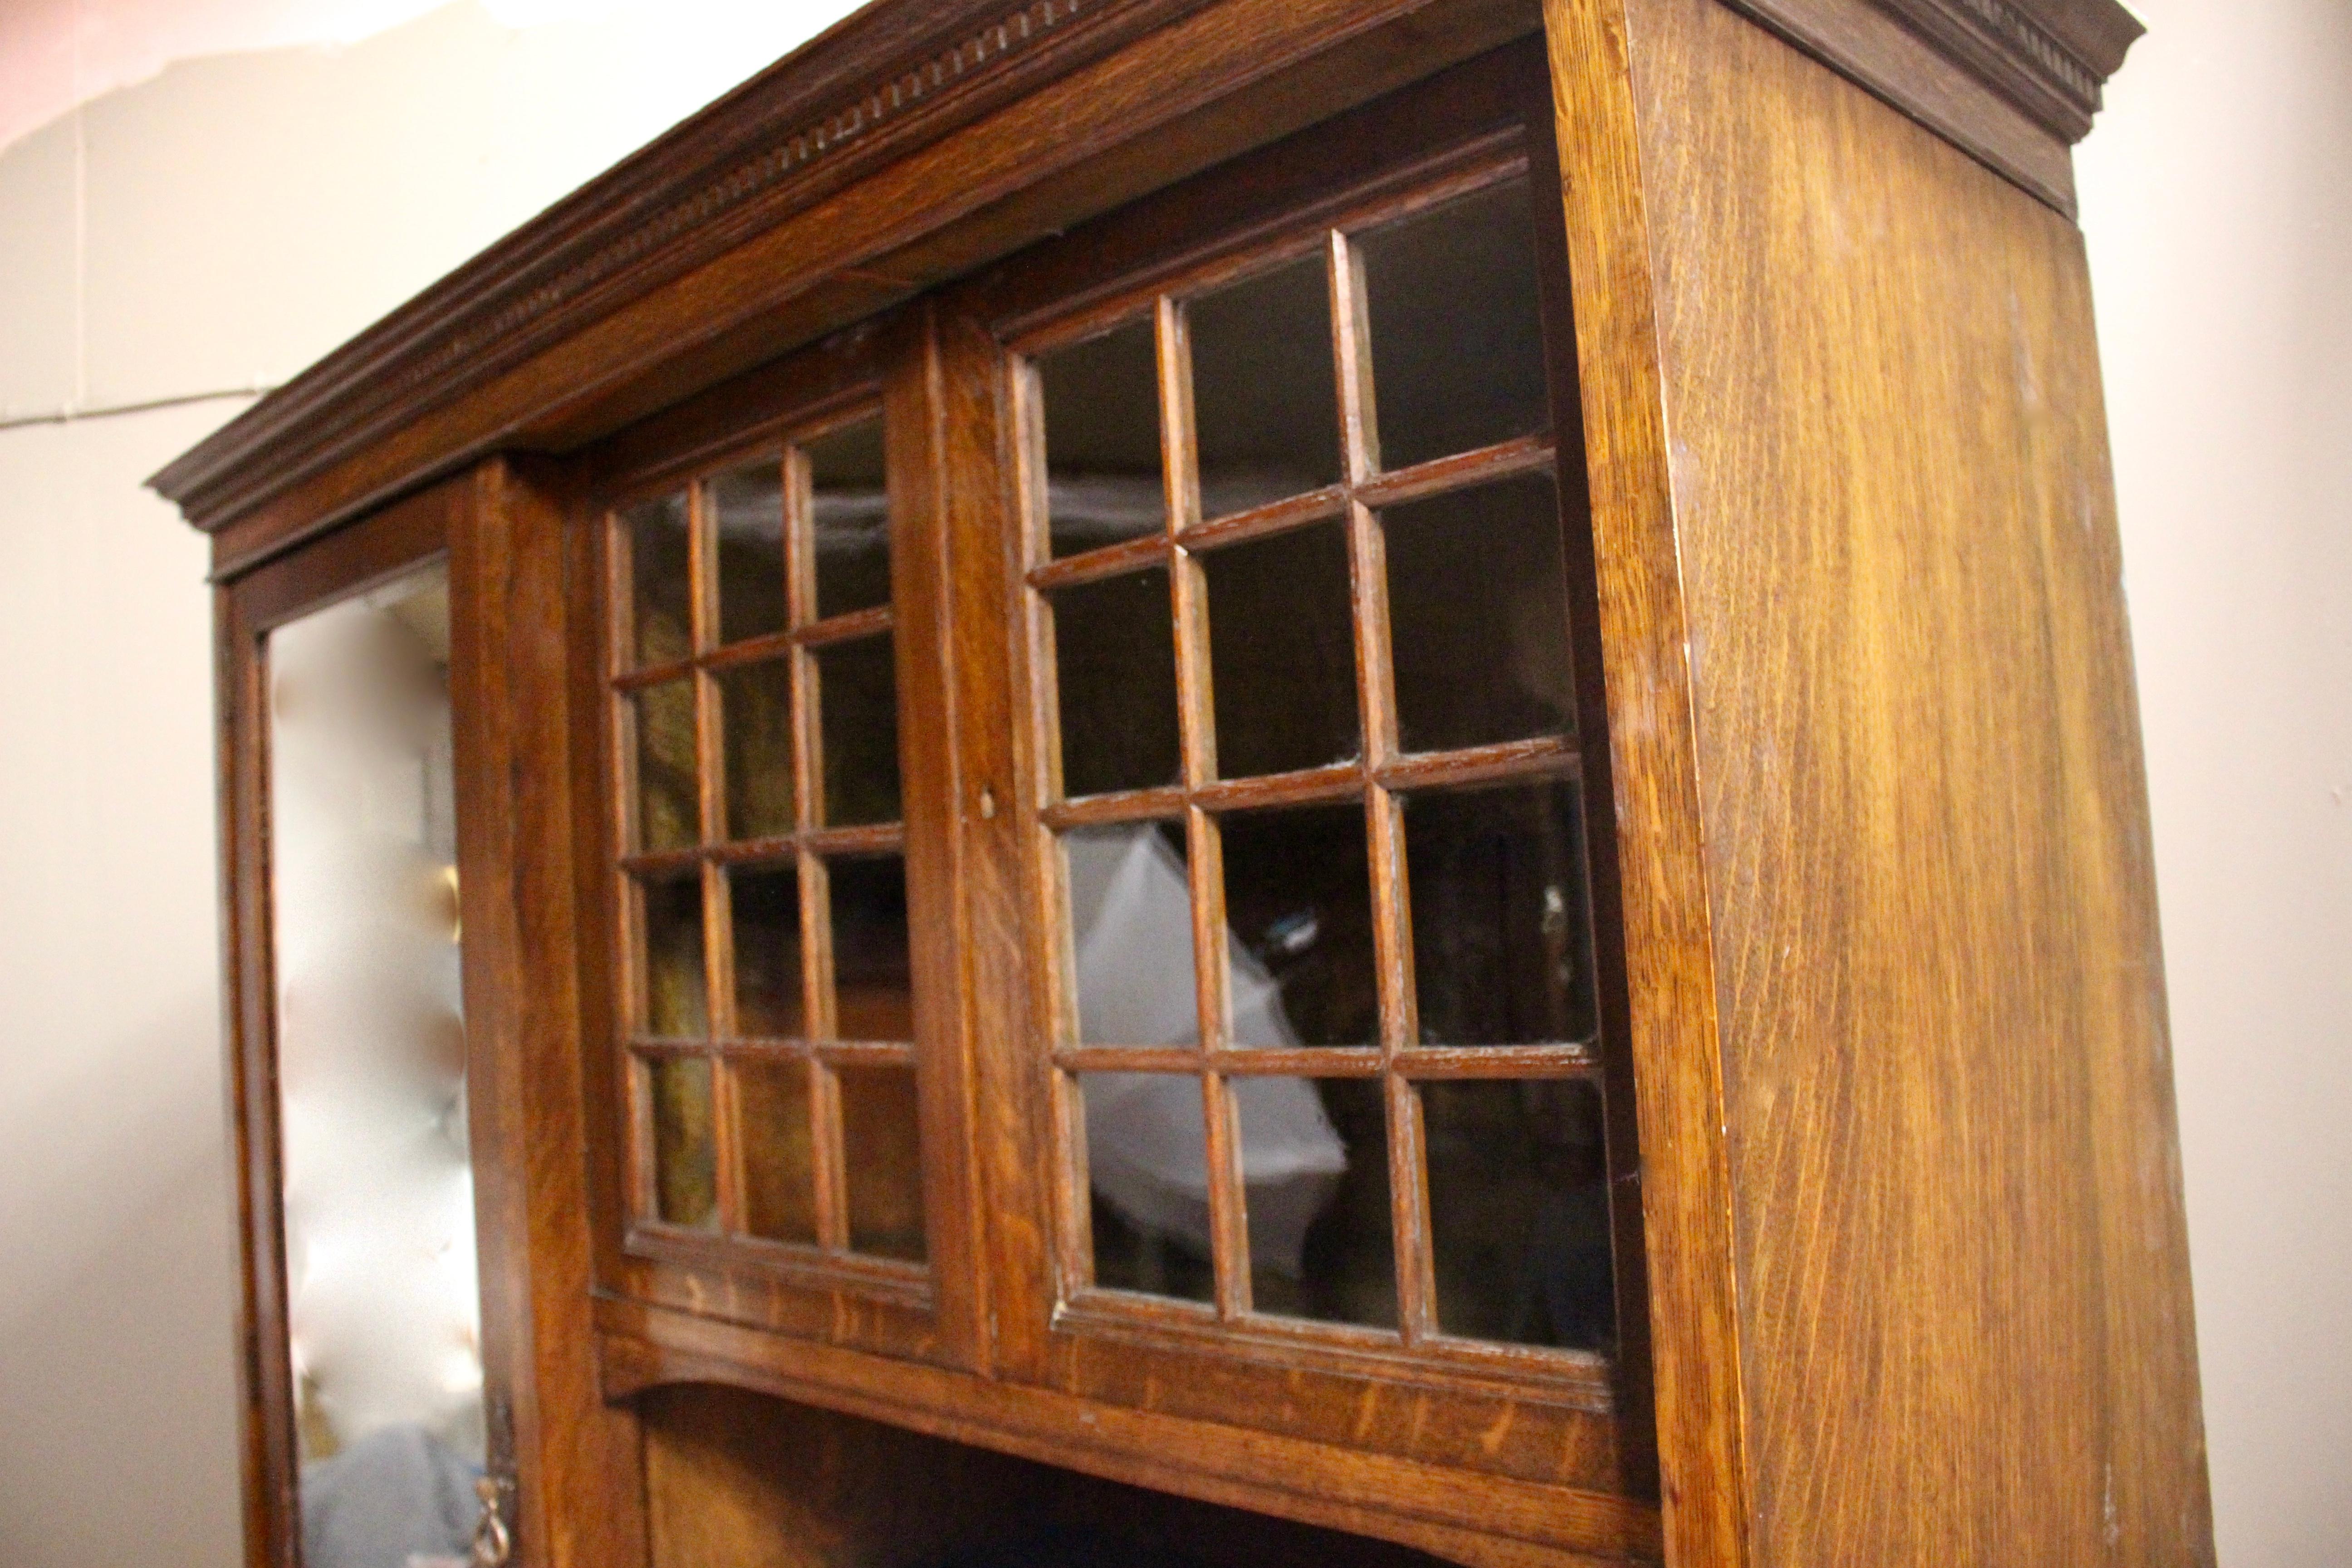 Late 19th Century Arts & Crafts Oak Wardrobe Purchased from Liberty & Co. London